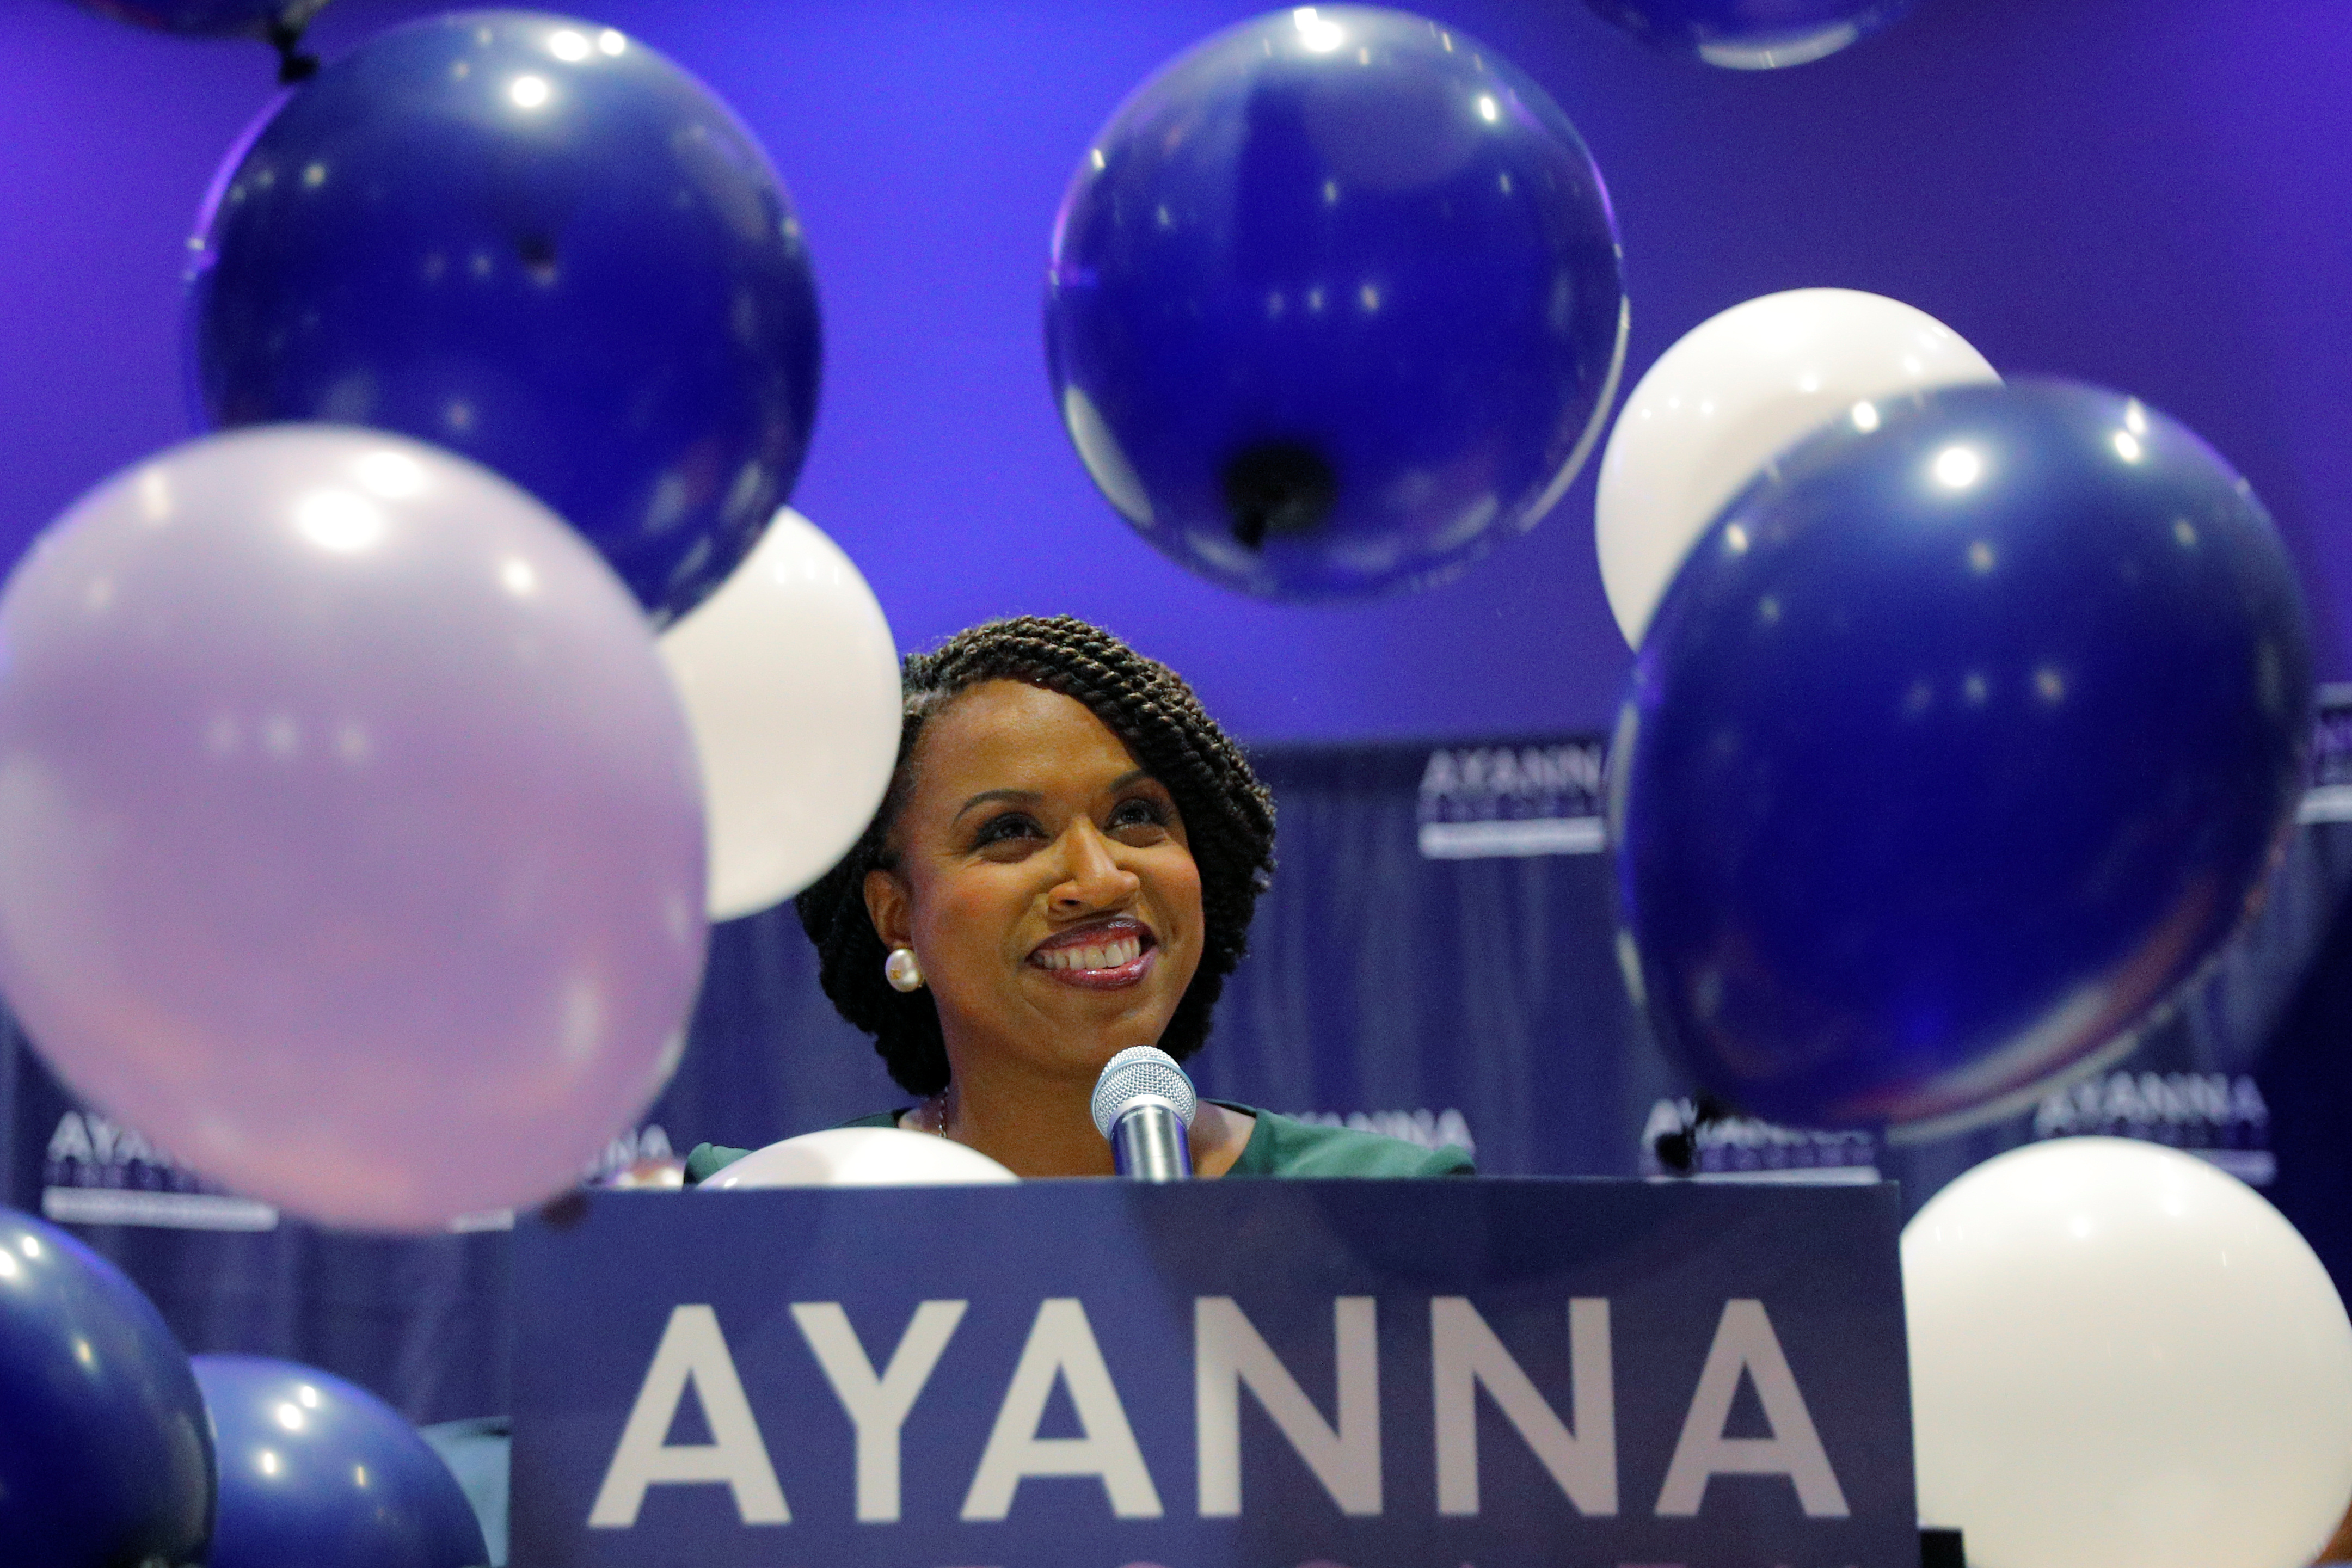 Balloons fall around Democratic candidate for U.S House of Representatives Ayanna Pressley at her primary election night rally in Boston in September 2018. Polls have been notoriously wrong in several states in recent years, including this year in Massachusetts, where candidate Pressley won the Democratic primary by 17 points despite polls predicting she would lose to incumbent Mike Capuano by more than a dozen points